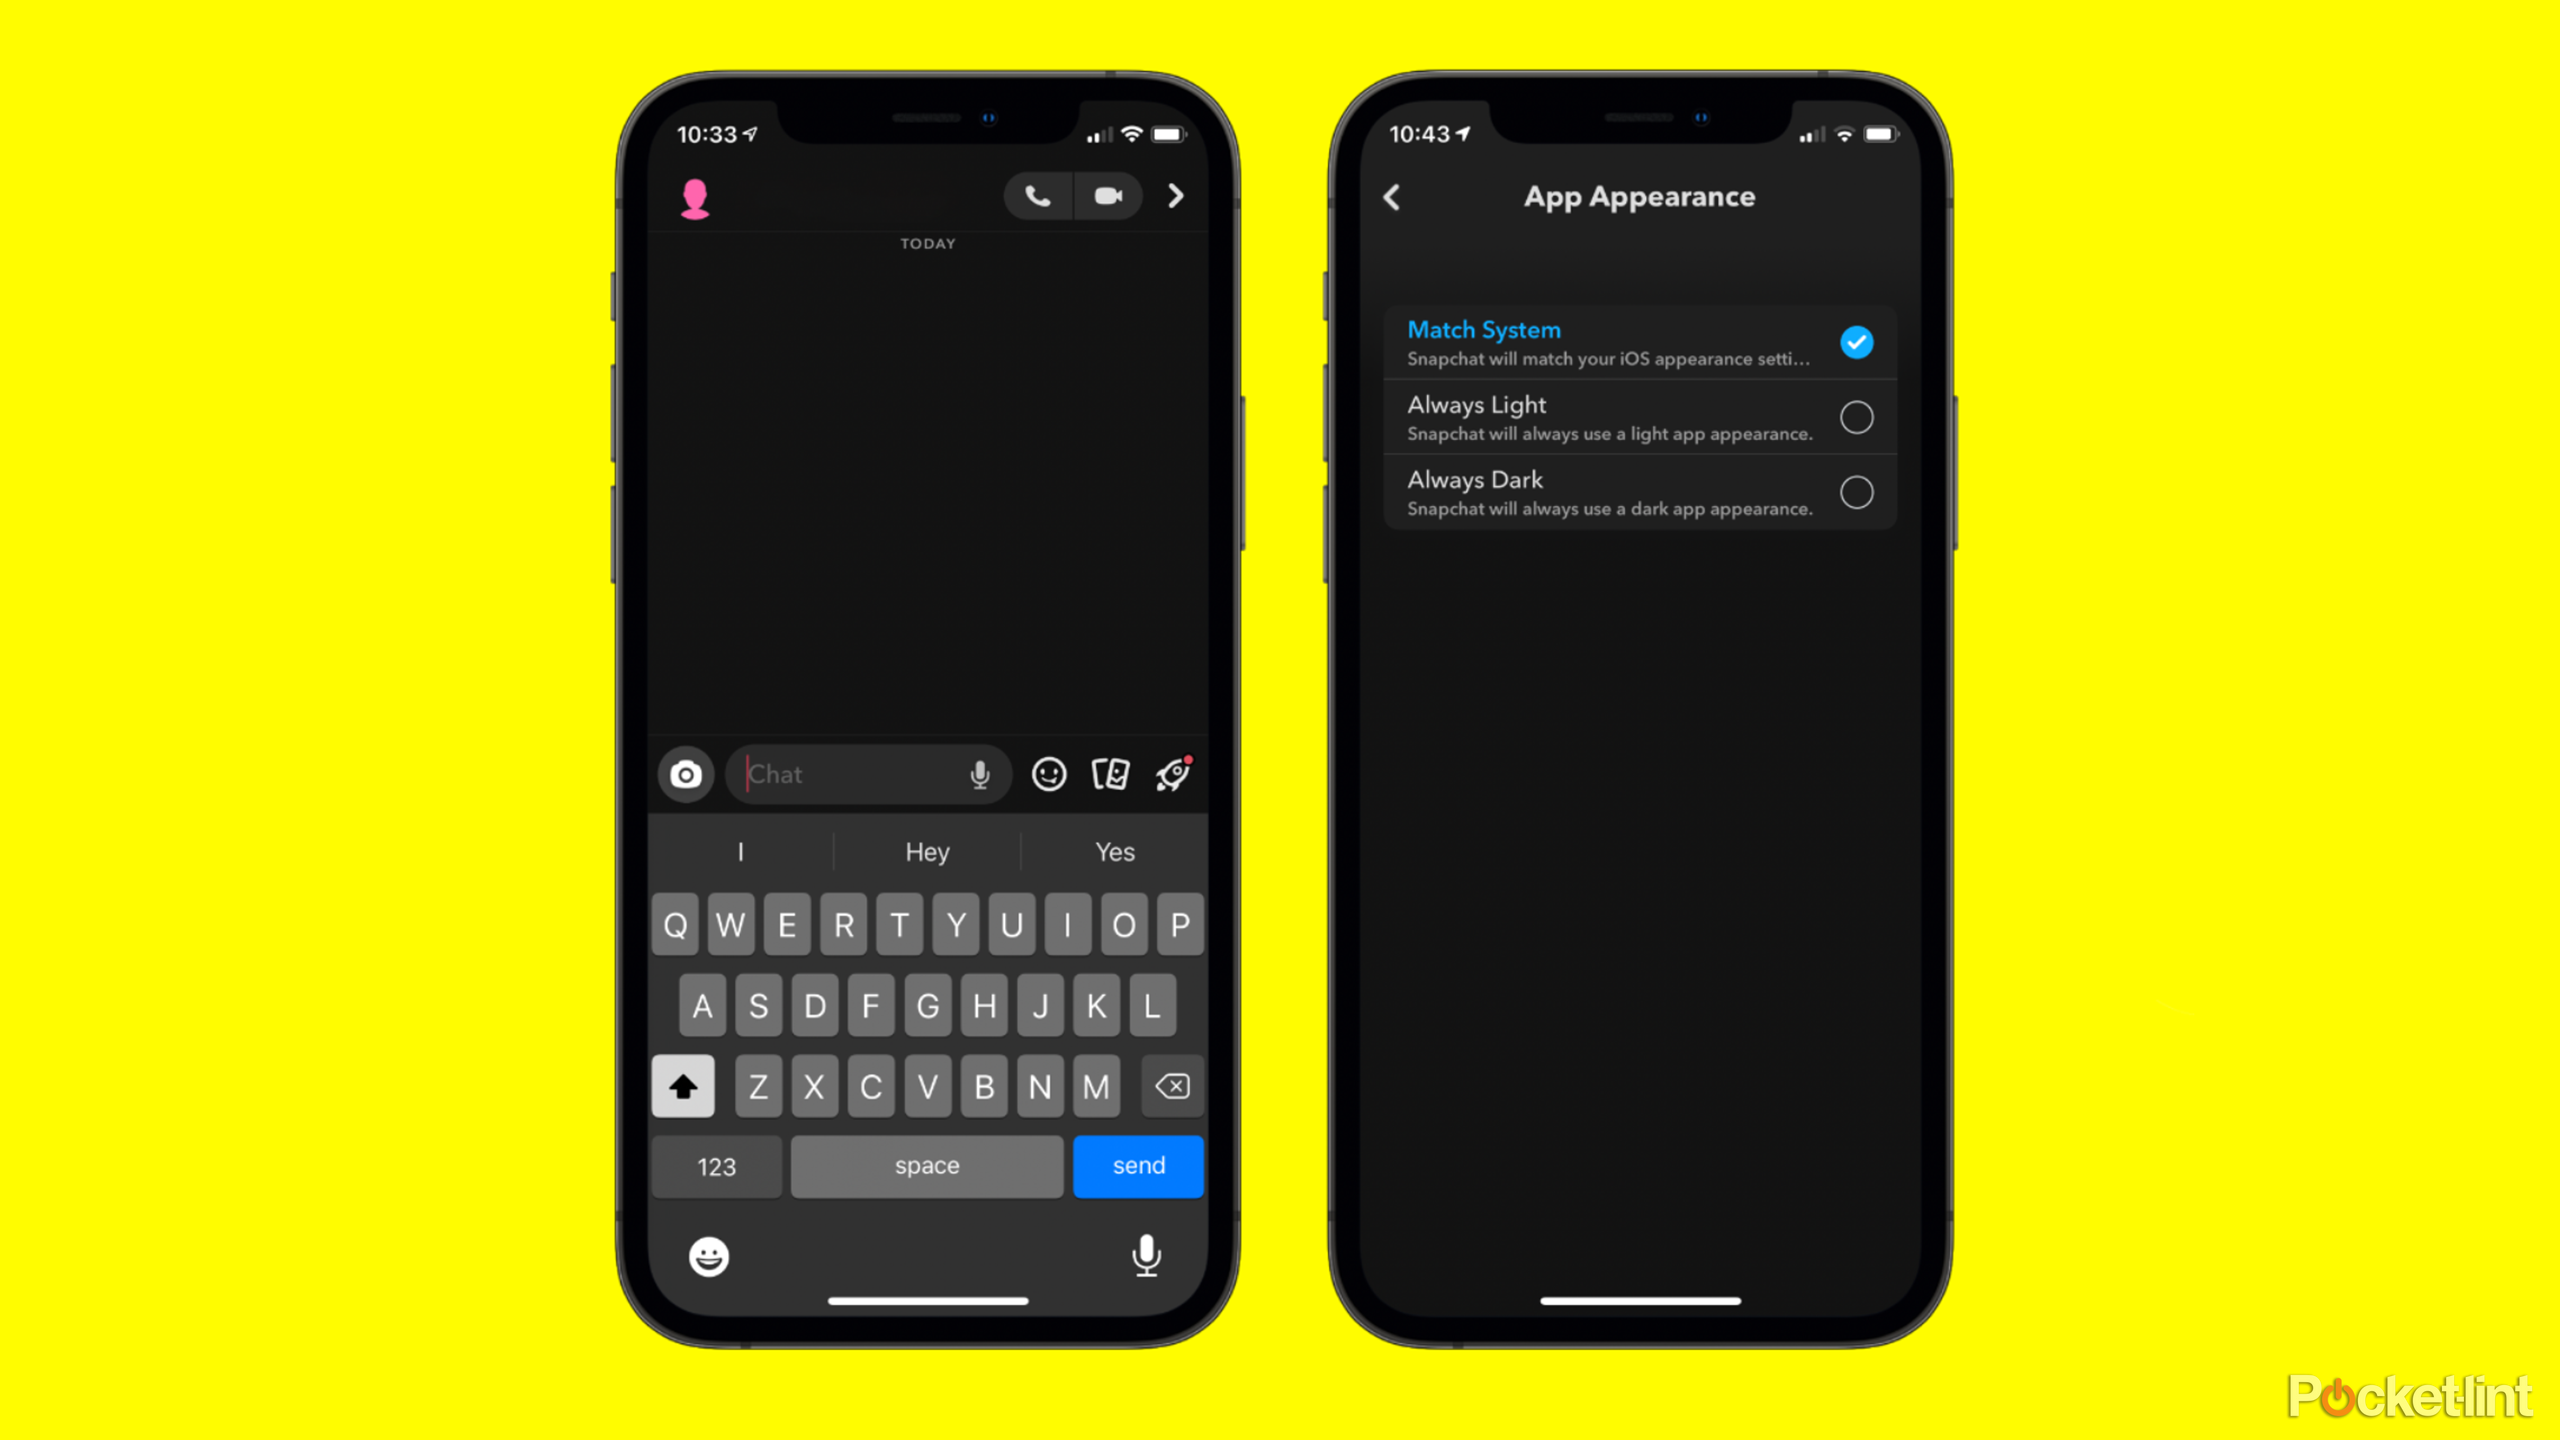 How to use Snapchat dark mode